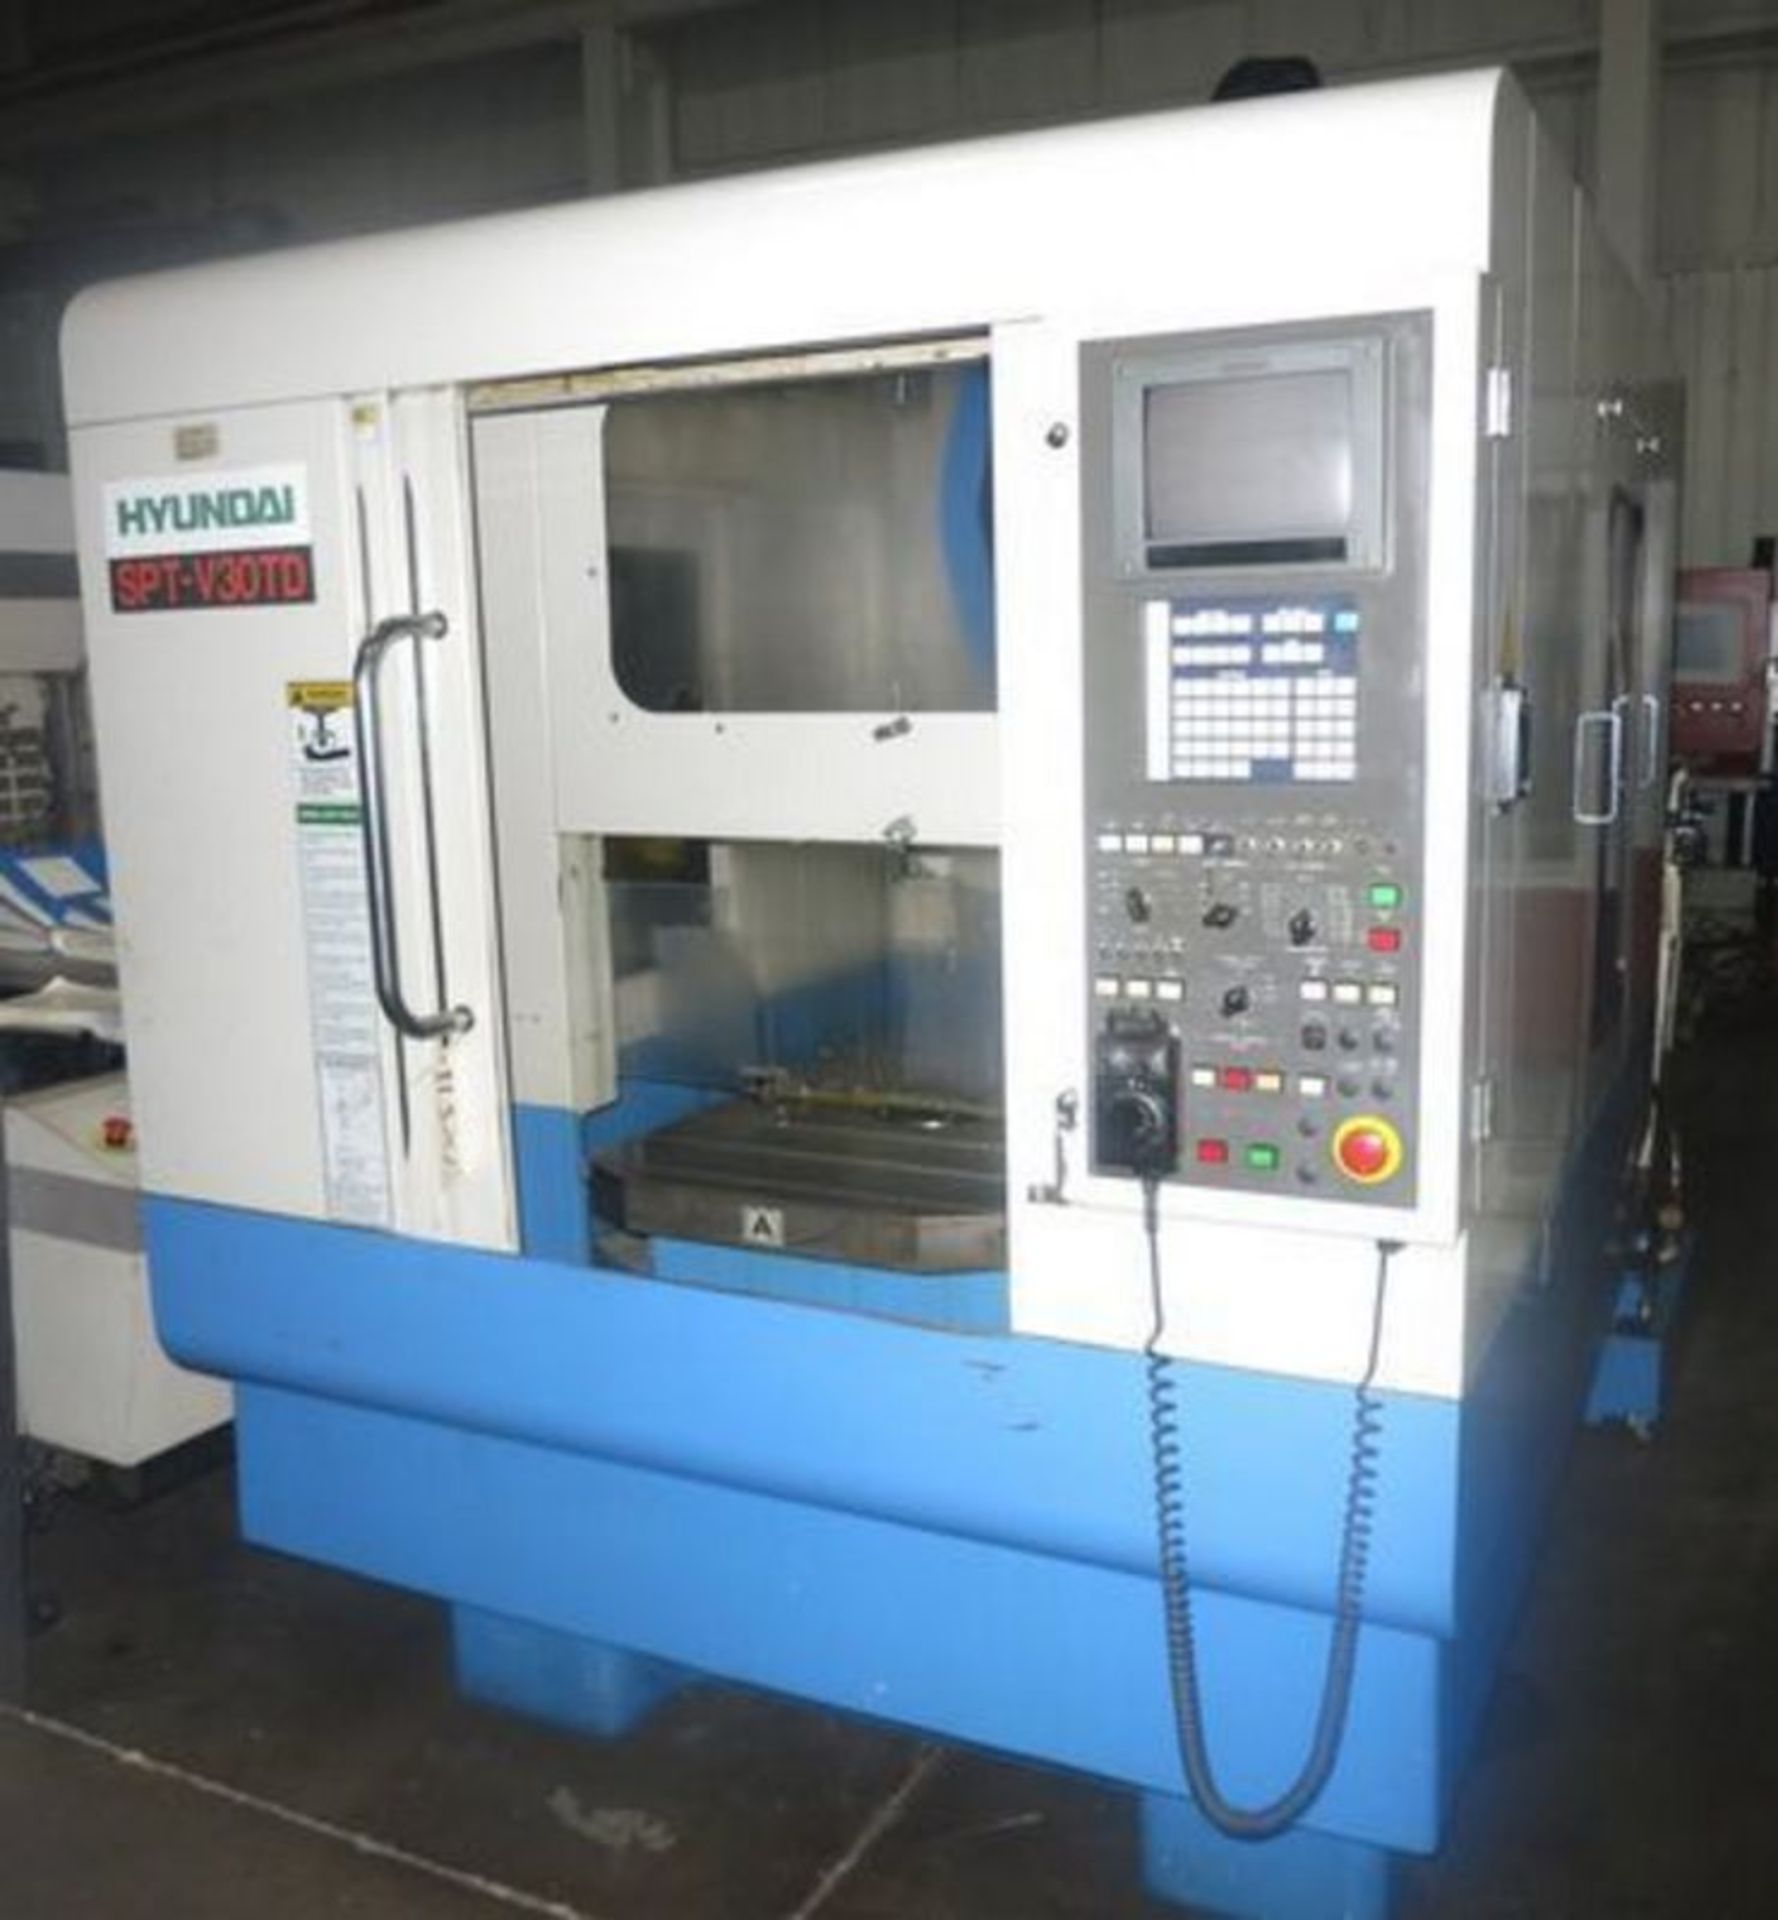 Hyundai SPTV30TD CNC Tap Mill Center W/Pallet Changer, S/N 73H8056, New 1999 General Specifications,